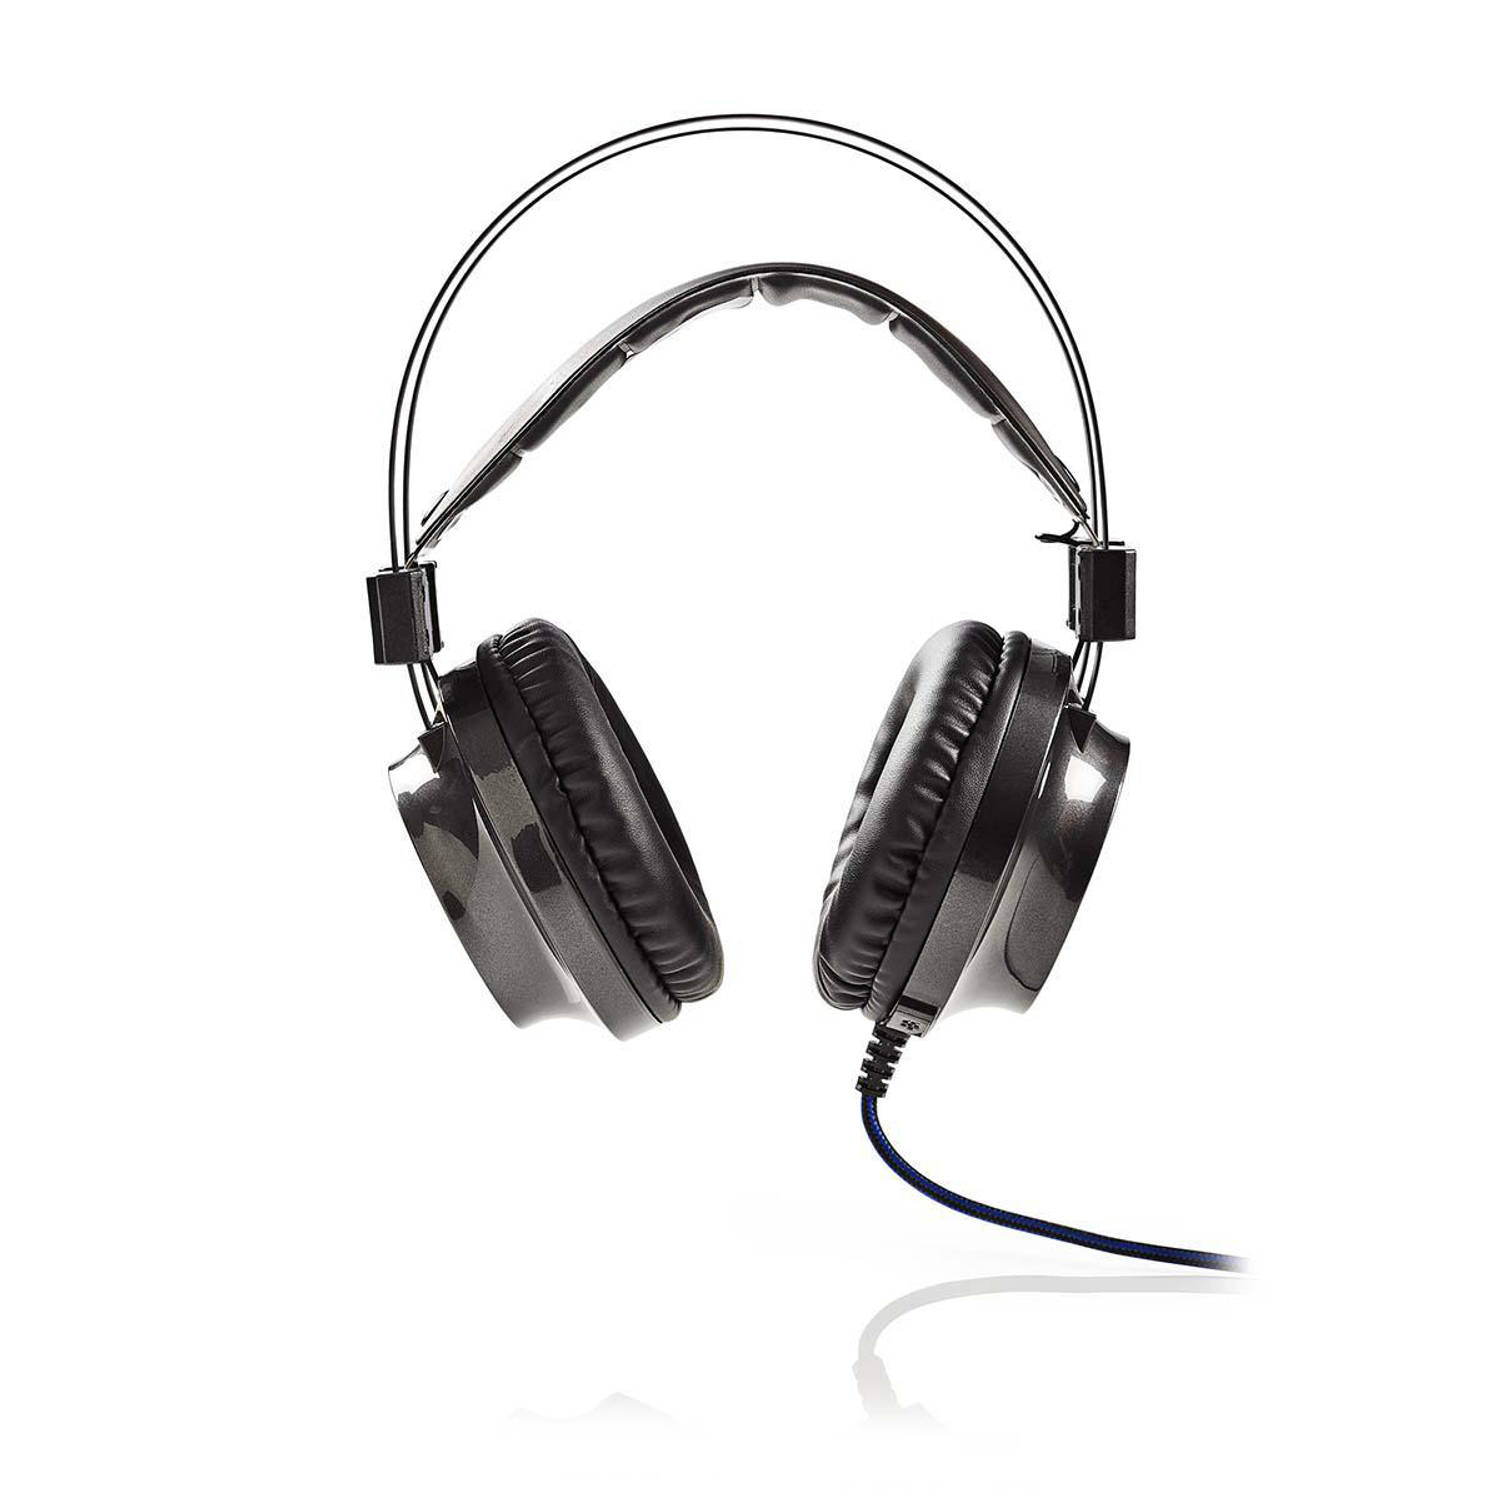 Gamingheadset | Over-Ear | Force-Feedback | LED-Verlichting | 3,5-mm & USB-Connectoren